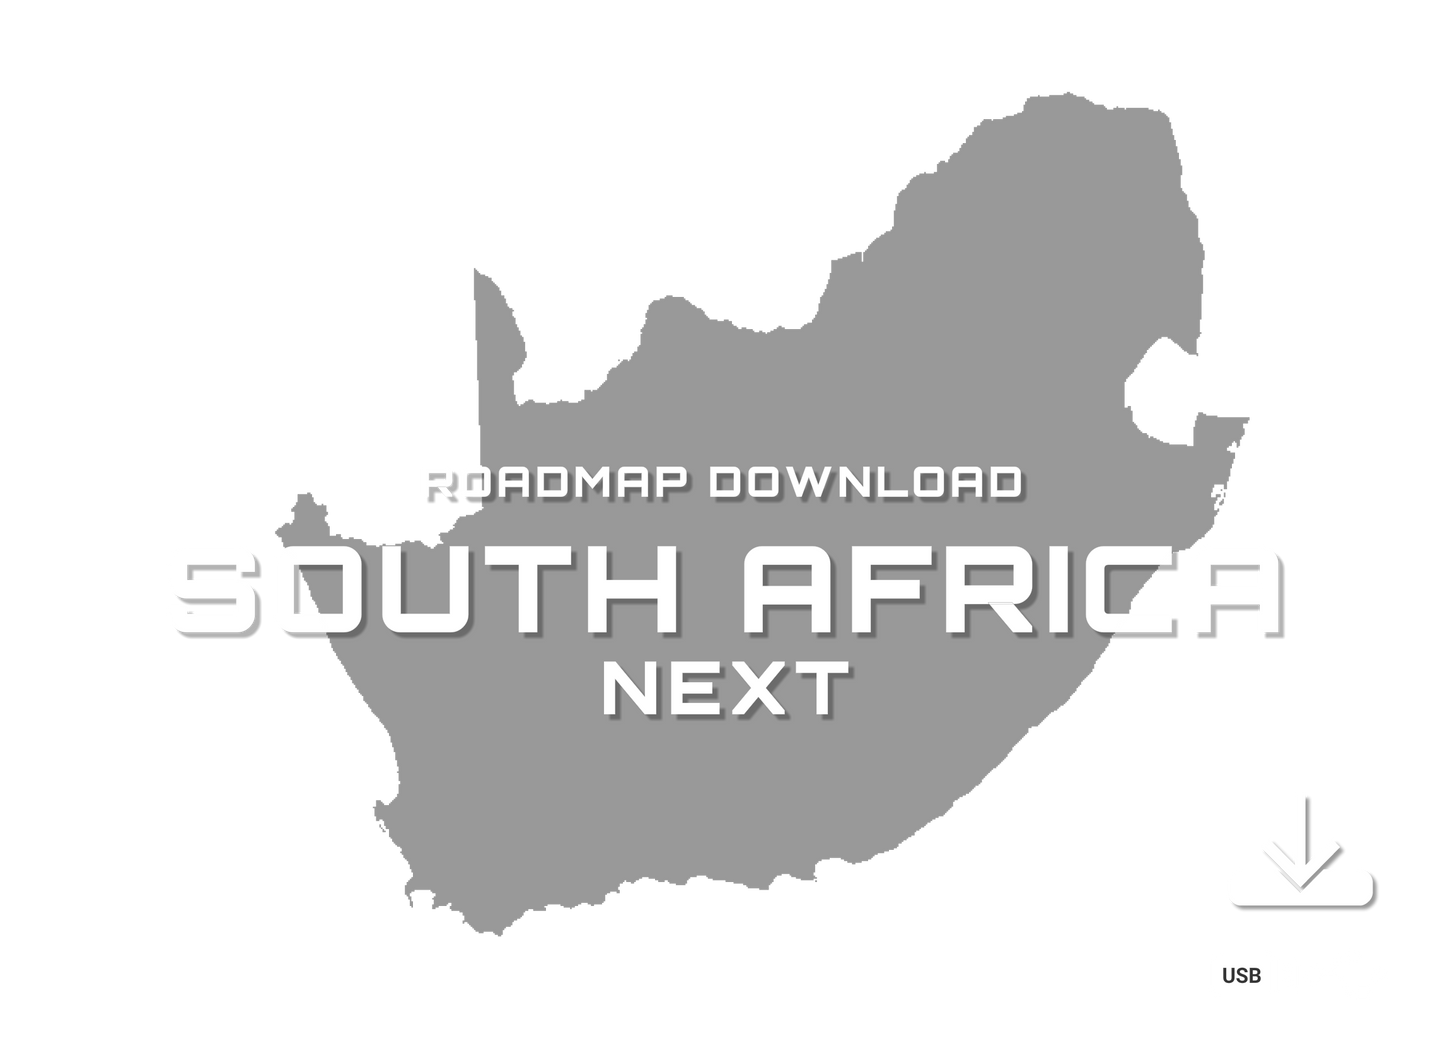 BMW ROAD MAP SOUTHERN AFRICA NEXT